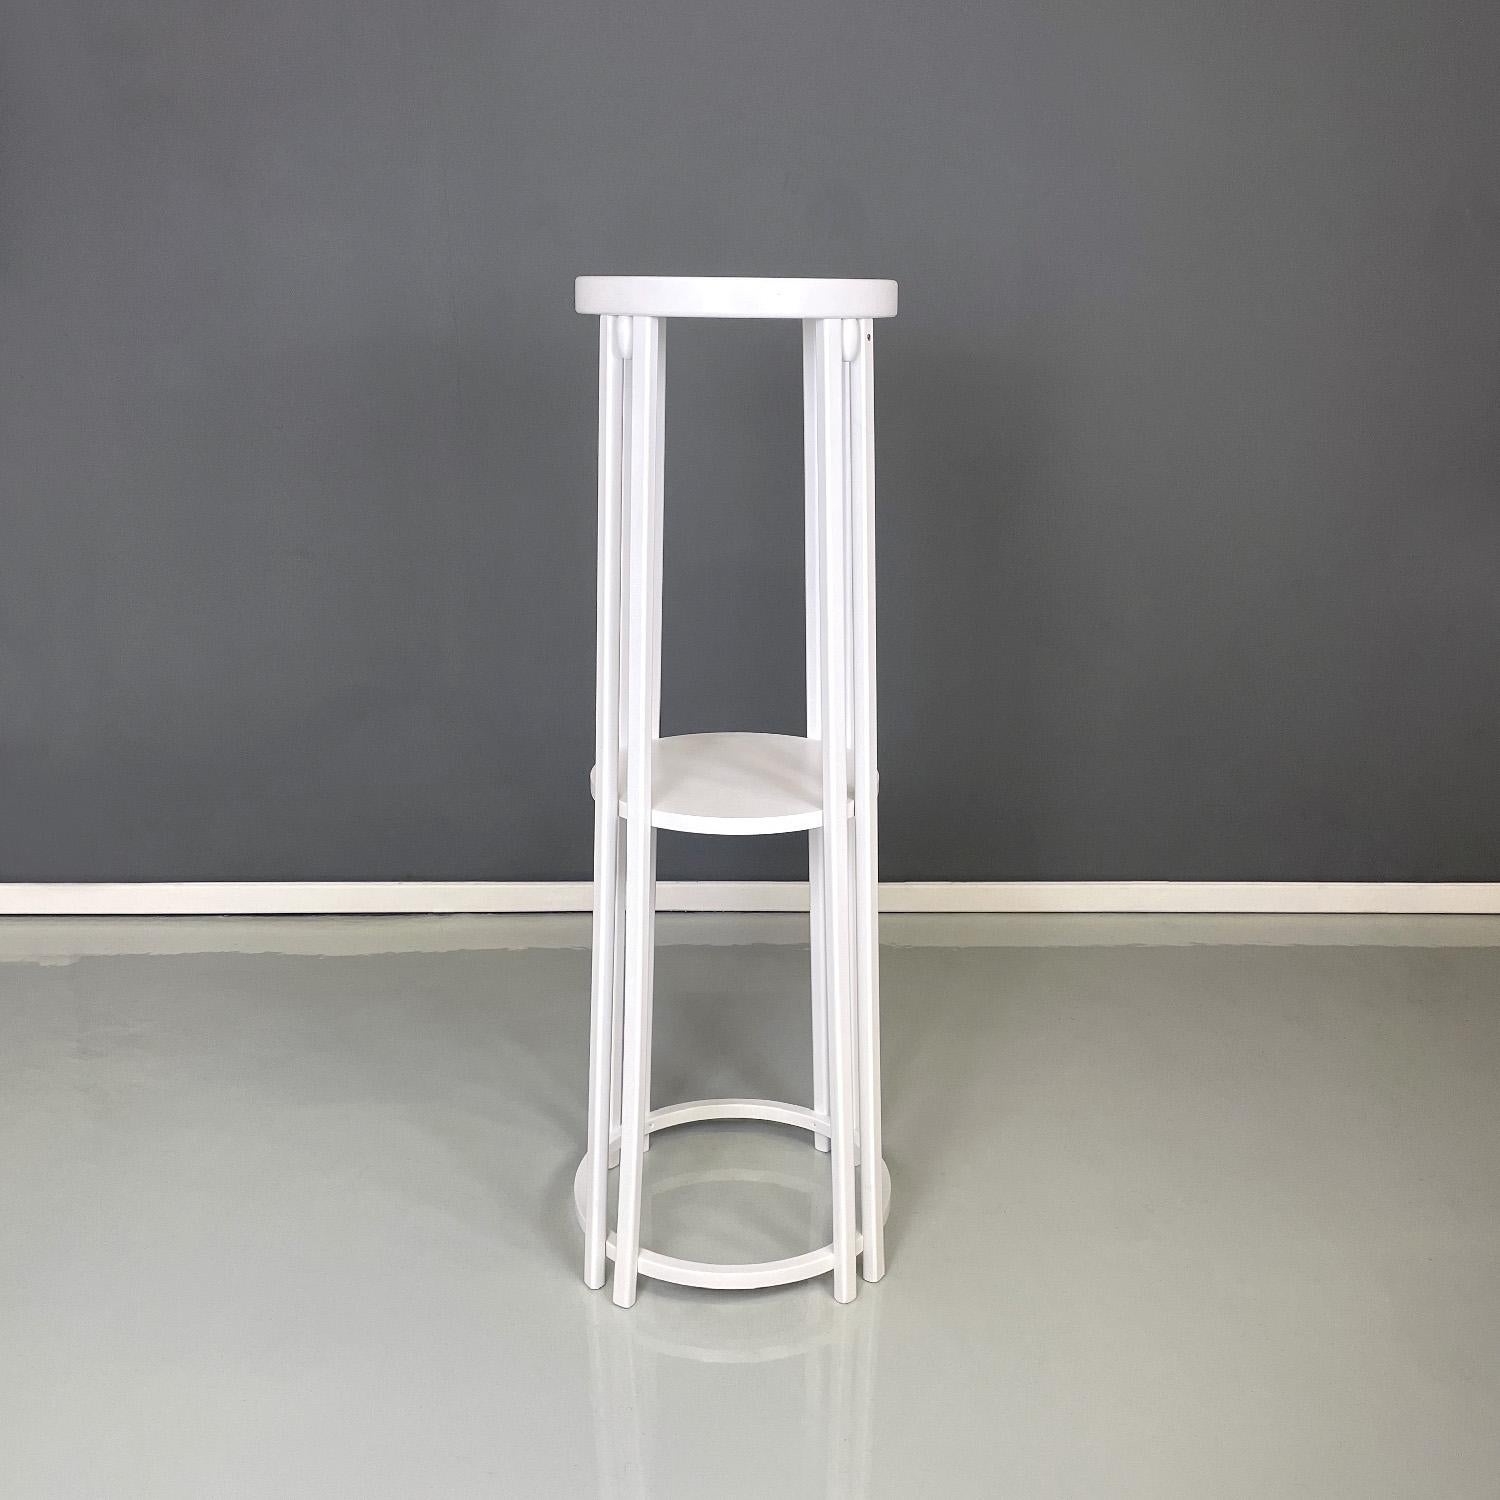 Austrian modern white wooden pedestal with two tops by Thonet, 1990s
Pedestal or display stand with round base. The structure is entirely made of white lacquered wood with a matt finish, it has a top at the top and a second top in the central part.